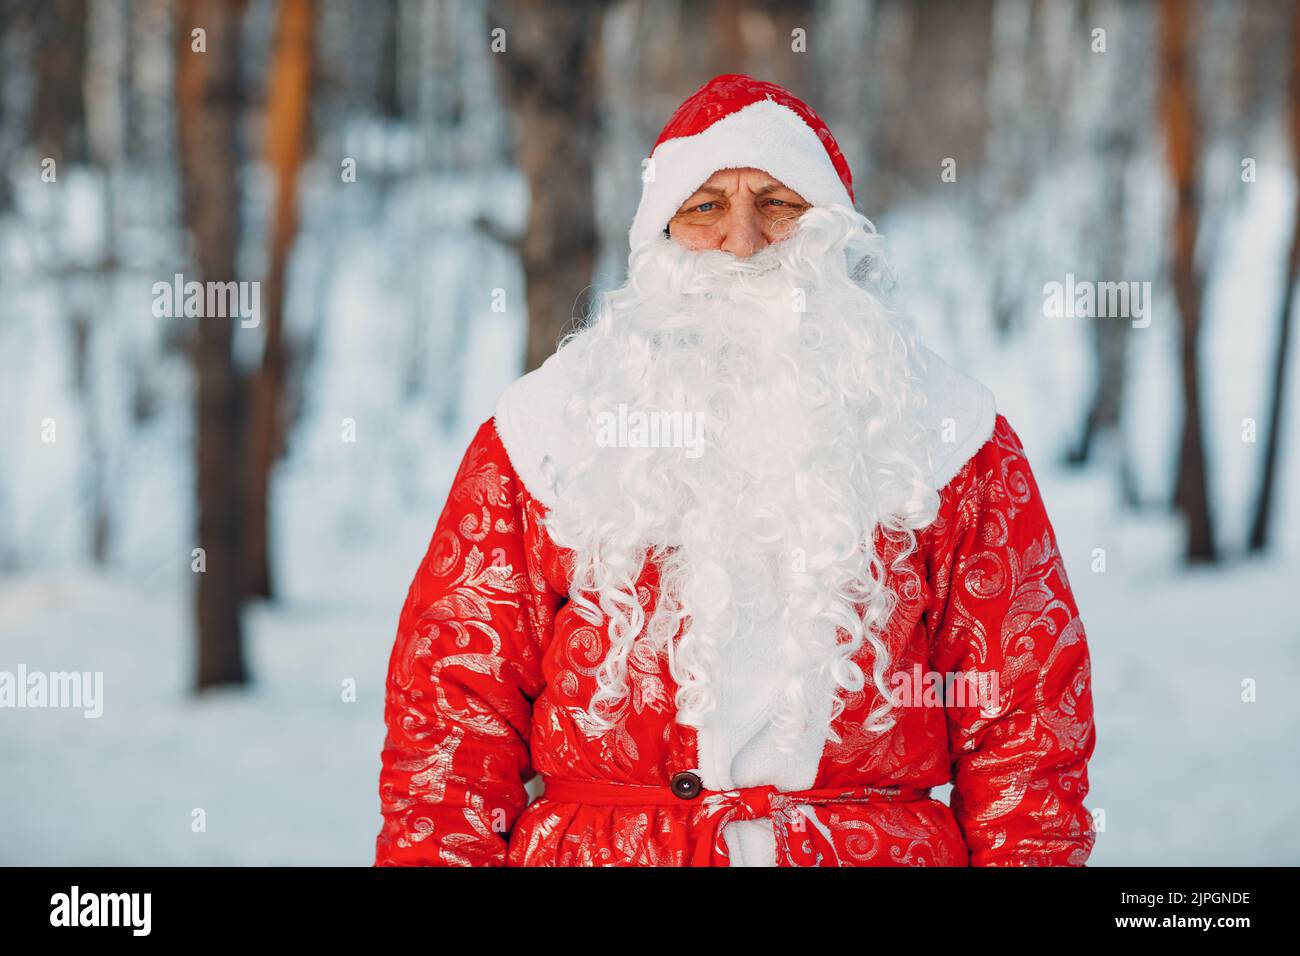 Santa Claus with long white beard portrait in the winter forest. Stock Photo